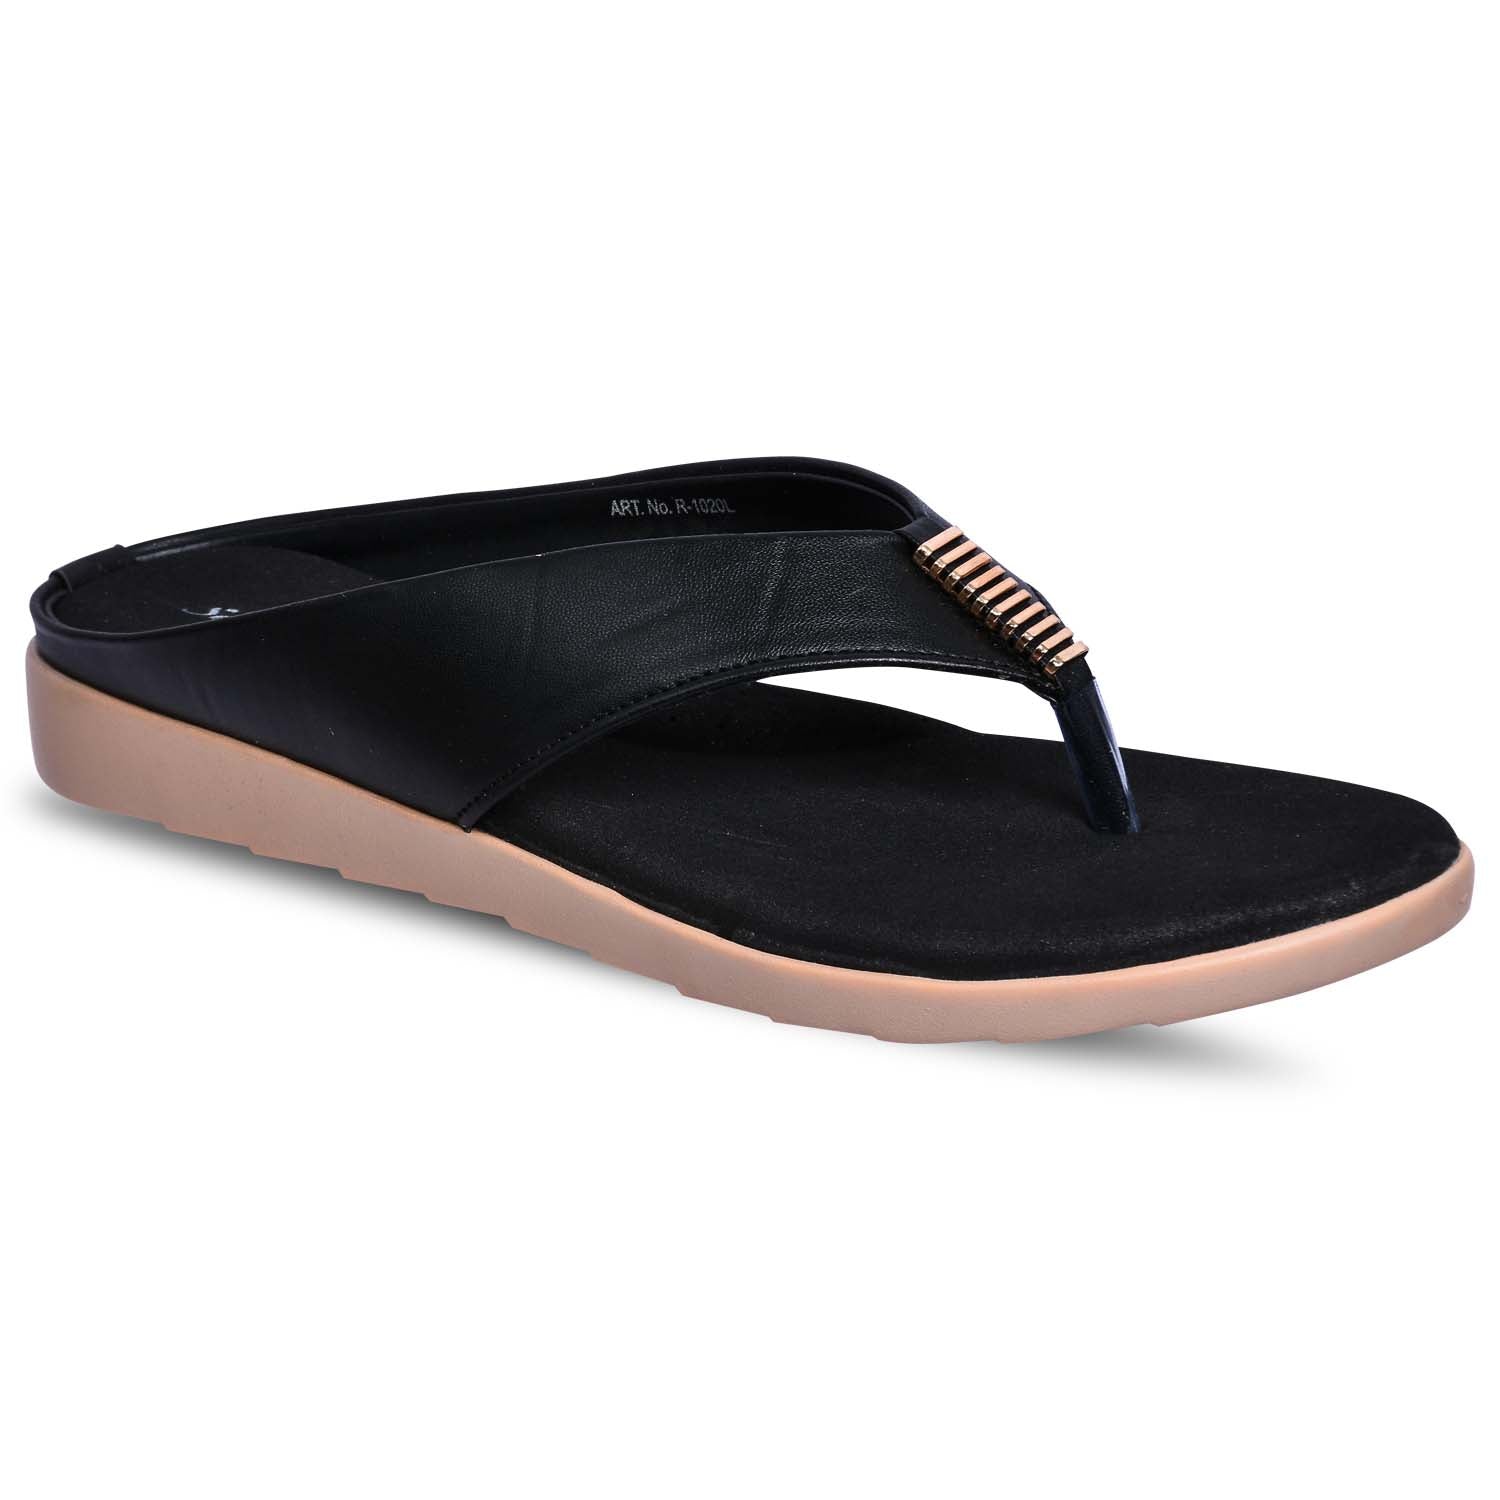 Paragon R1020L Women Sandals | Casual &amp; Formal Sandals | Stylish, Comfortable &amp; Durable | For Daily &amp; Occasion Wear